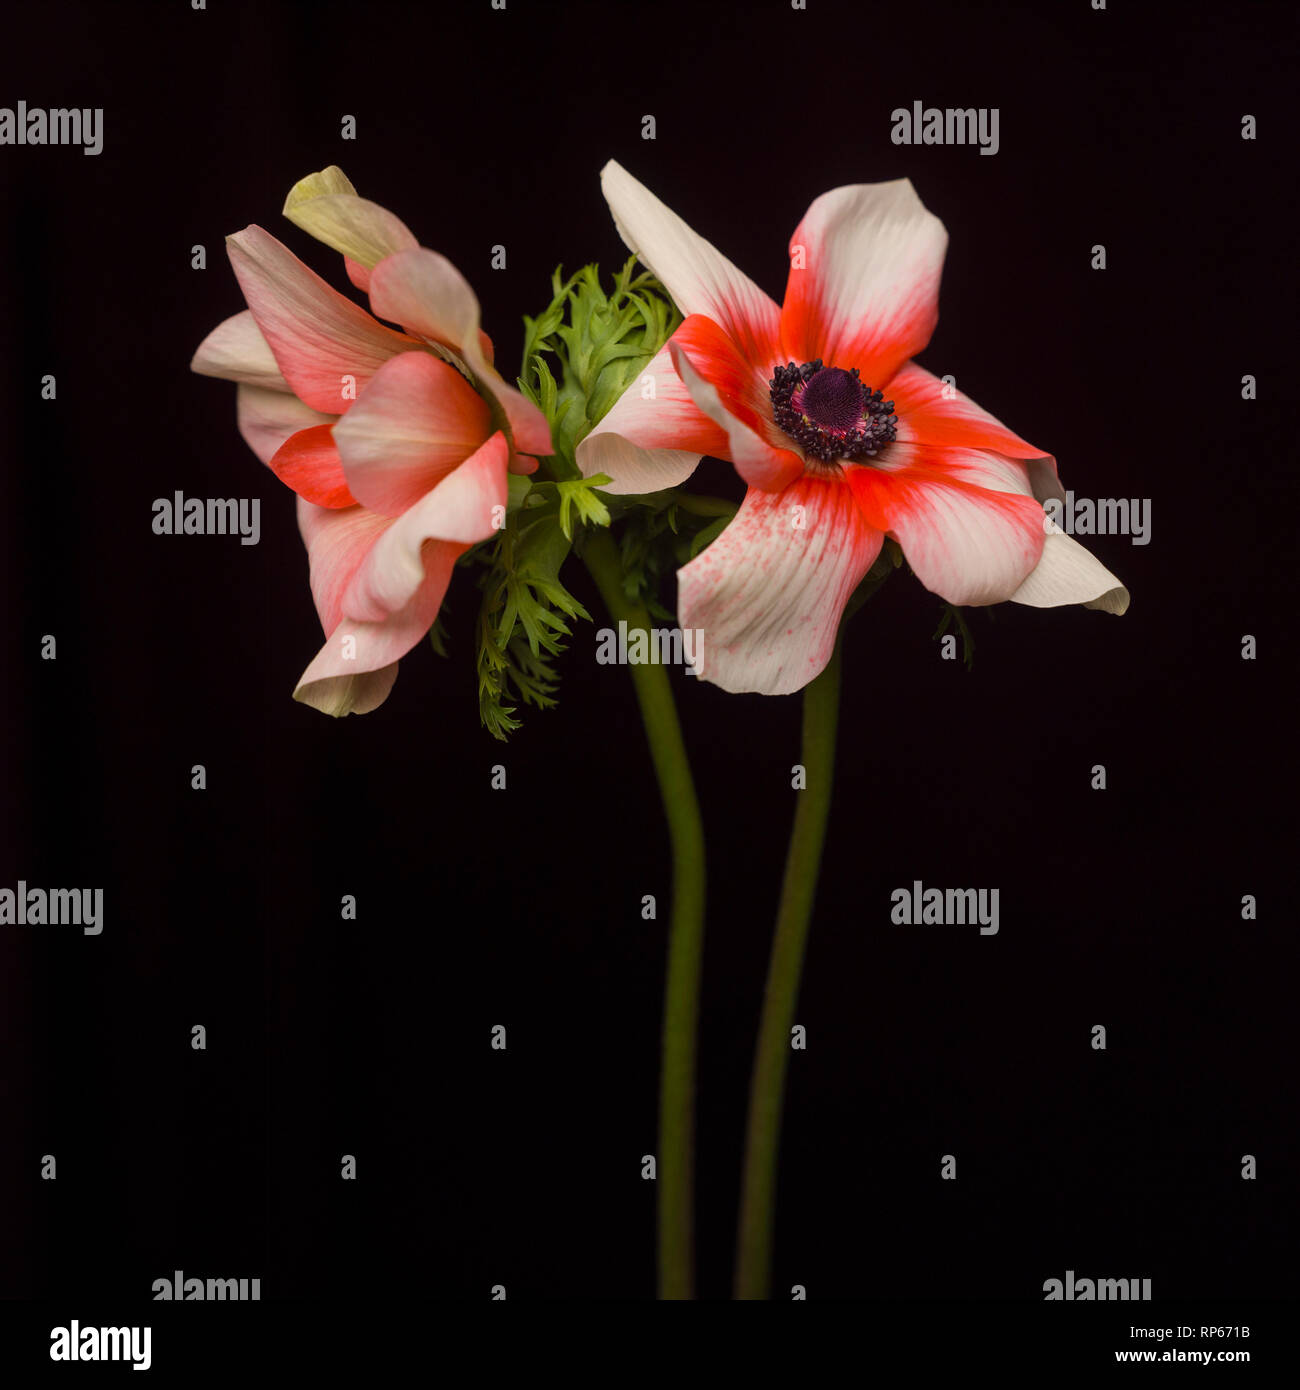 Two Anemone Flowers against Black Background Stock Photo